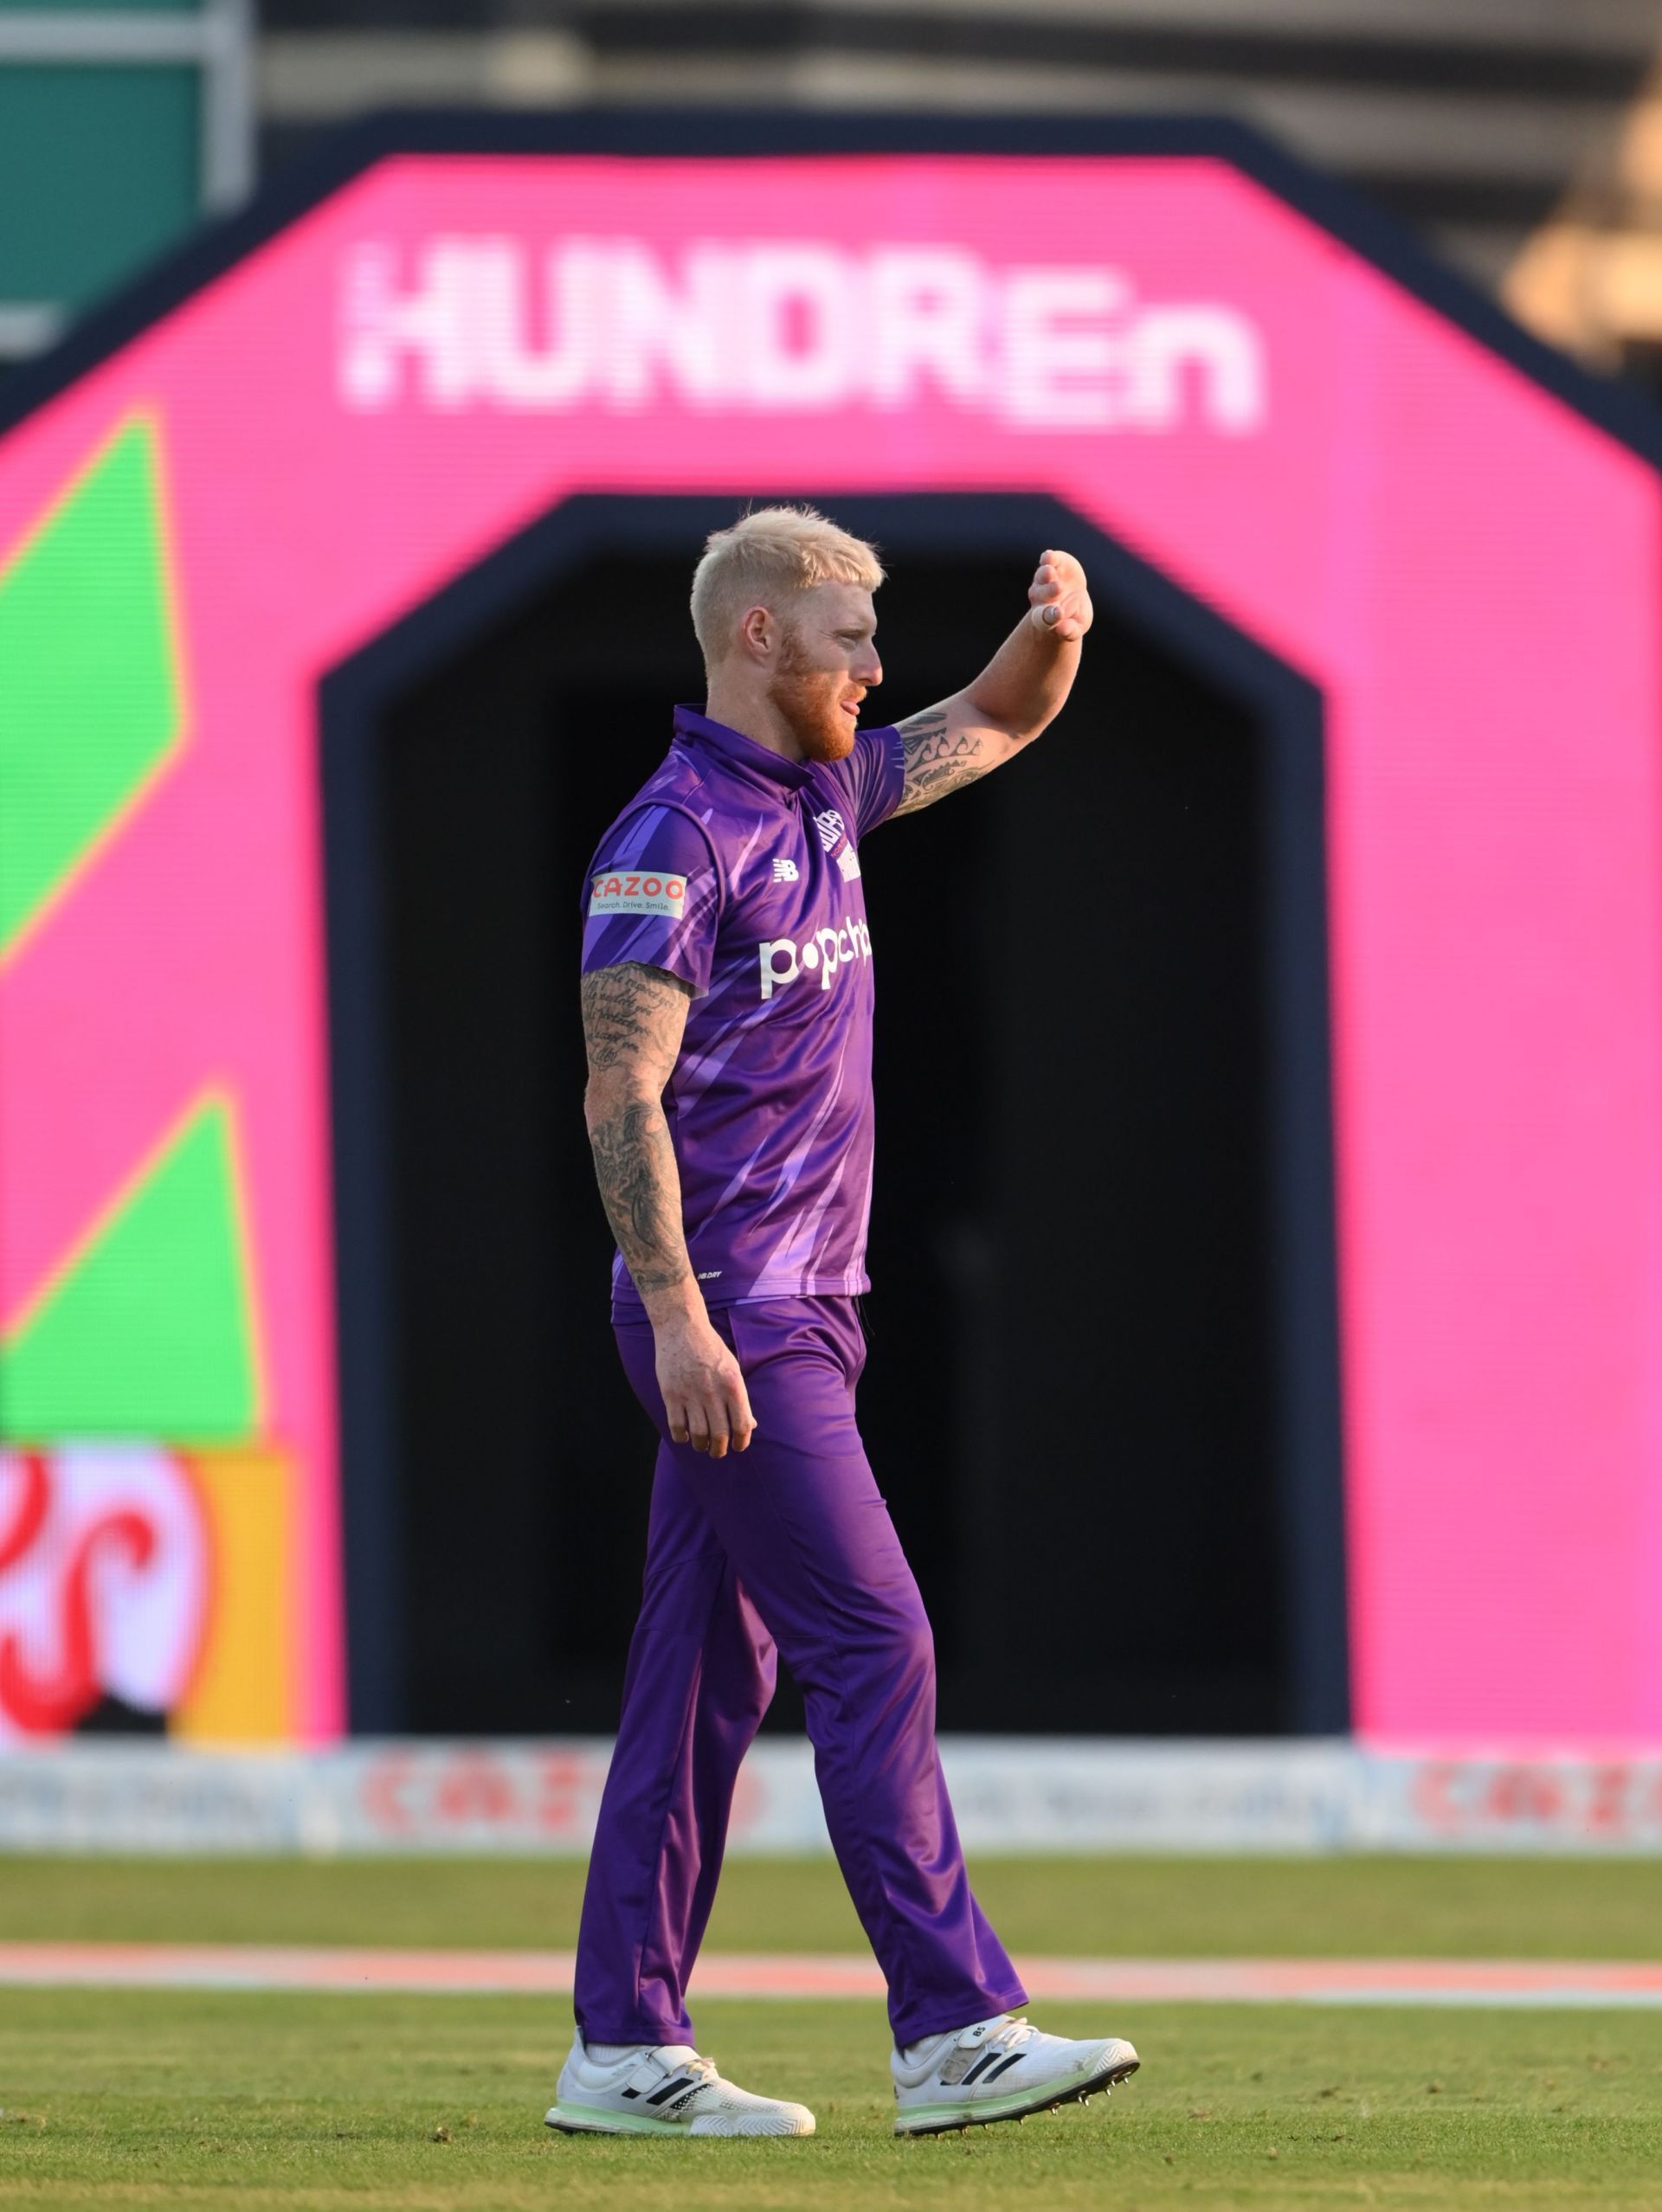 Ben Stokes last played in The Hundred